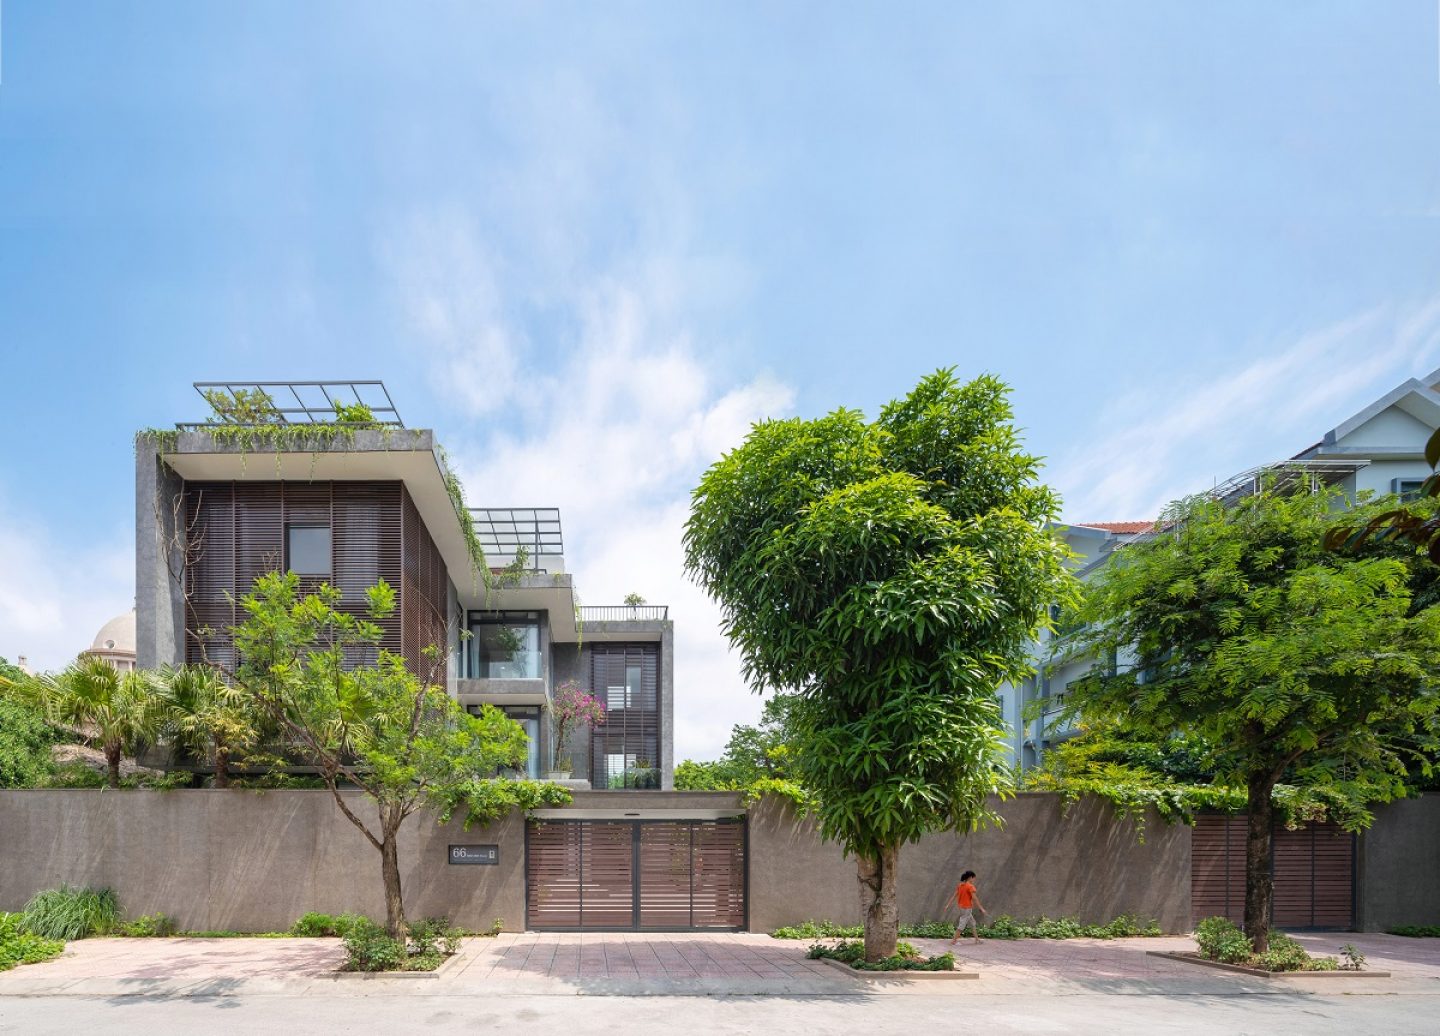 You are currently viewing Ninh Bình Villa | Nguyen Khac Phuoc Architects